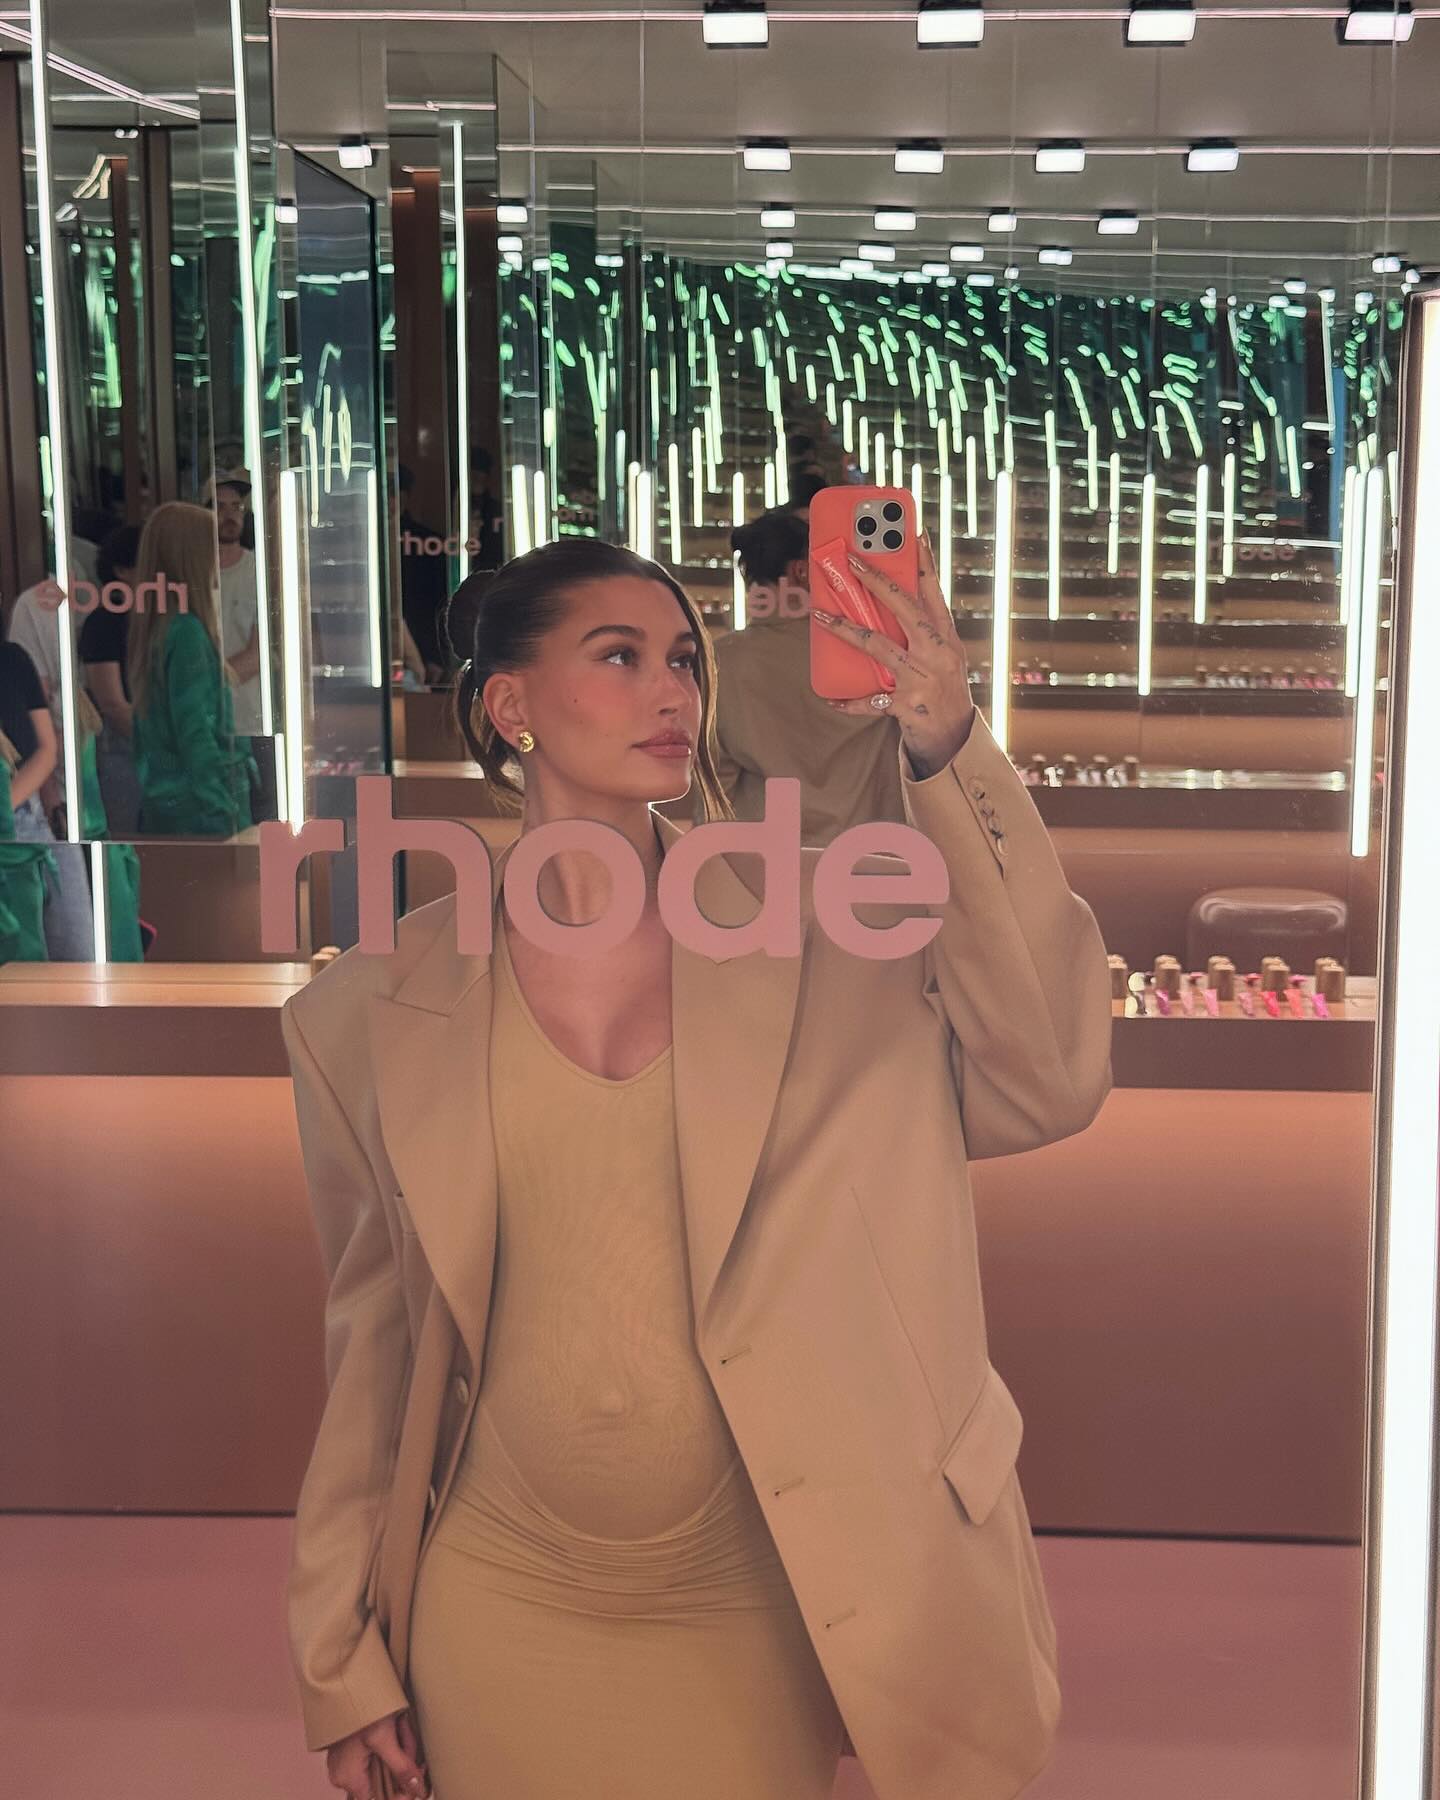 On Sunday, Hailey Bieber attended the pop-up shop for her skincare brand, Rhode